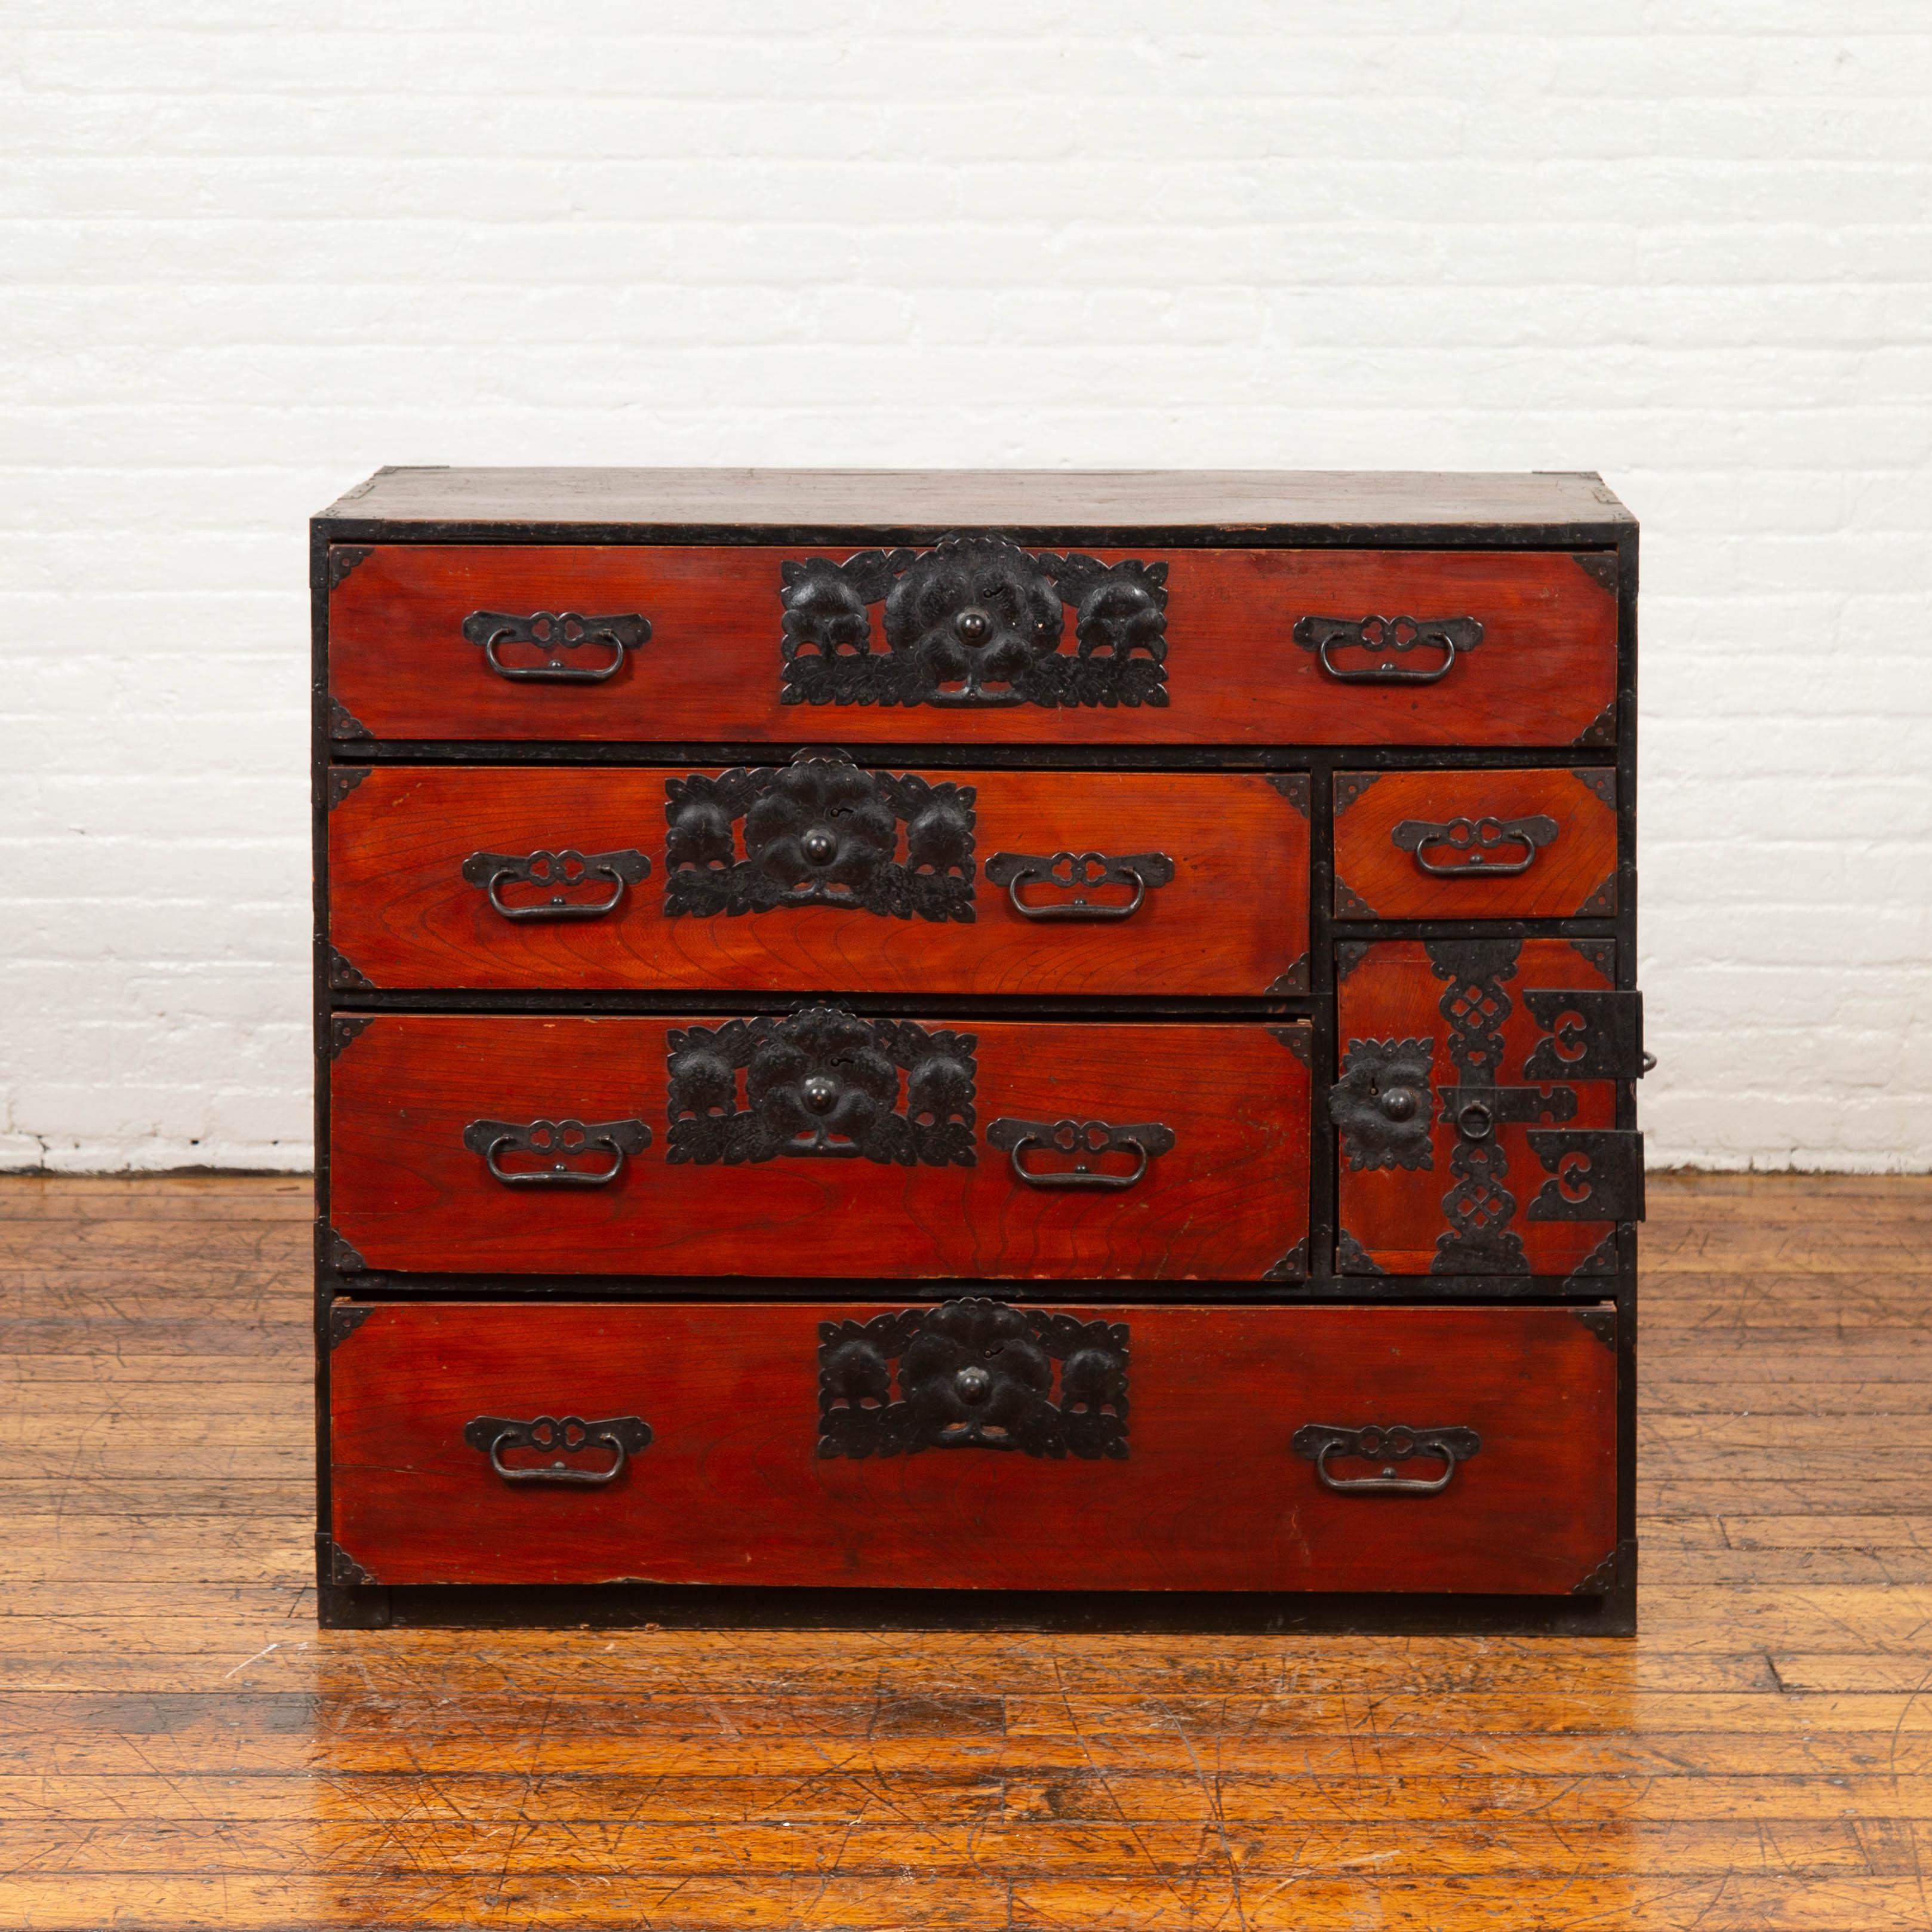 A Japanese 19th century Sendai tansu (Isho-dansu) clothing cabinet with drawers and elaborate bronze hardware. Born in Japan during the 19th century, this wooden Tansu chest is a fine example of Japan's traditional cabinetry. Featuring a lovely